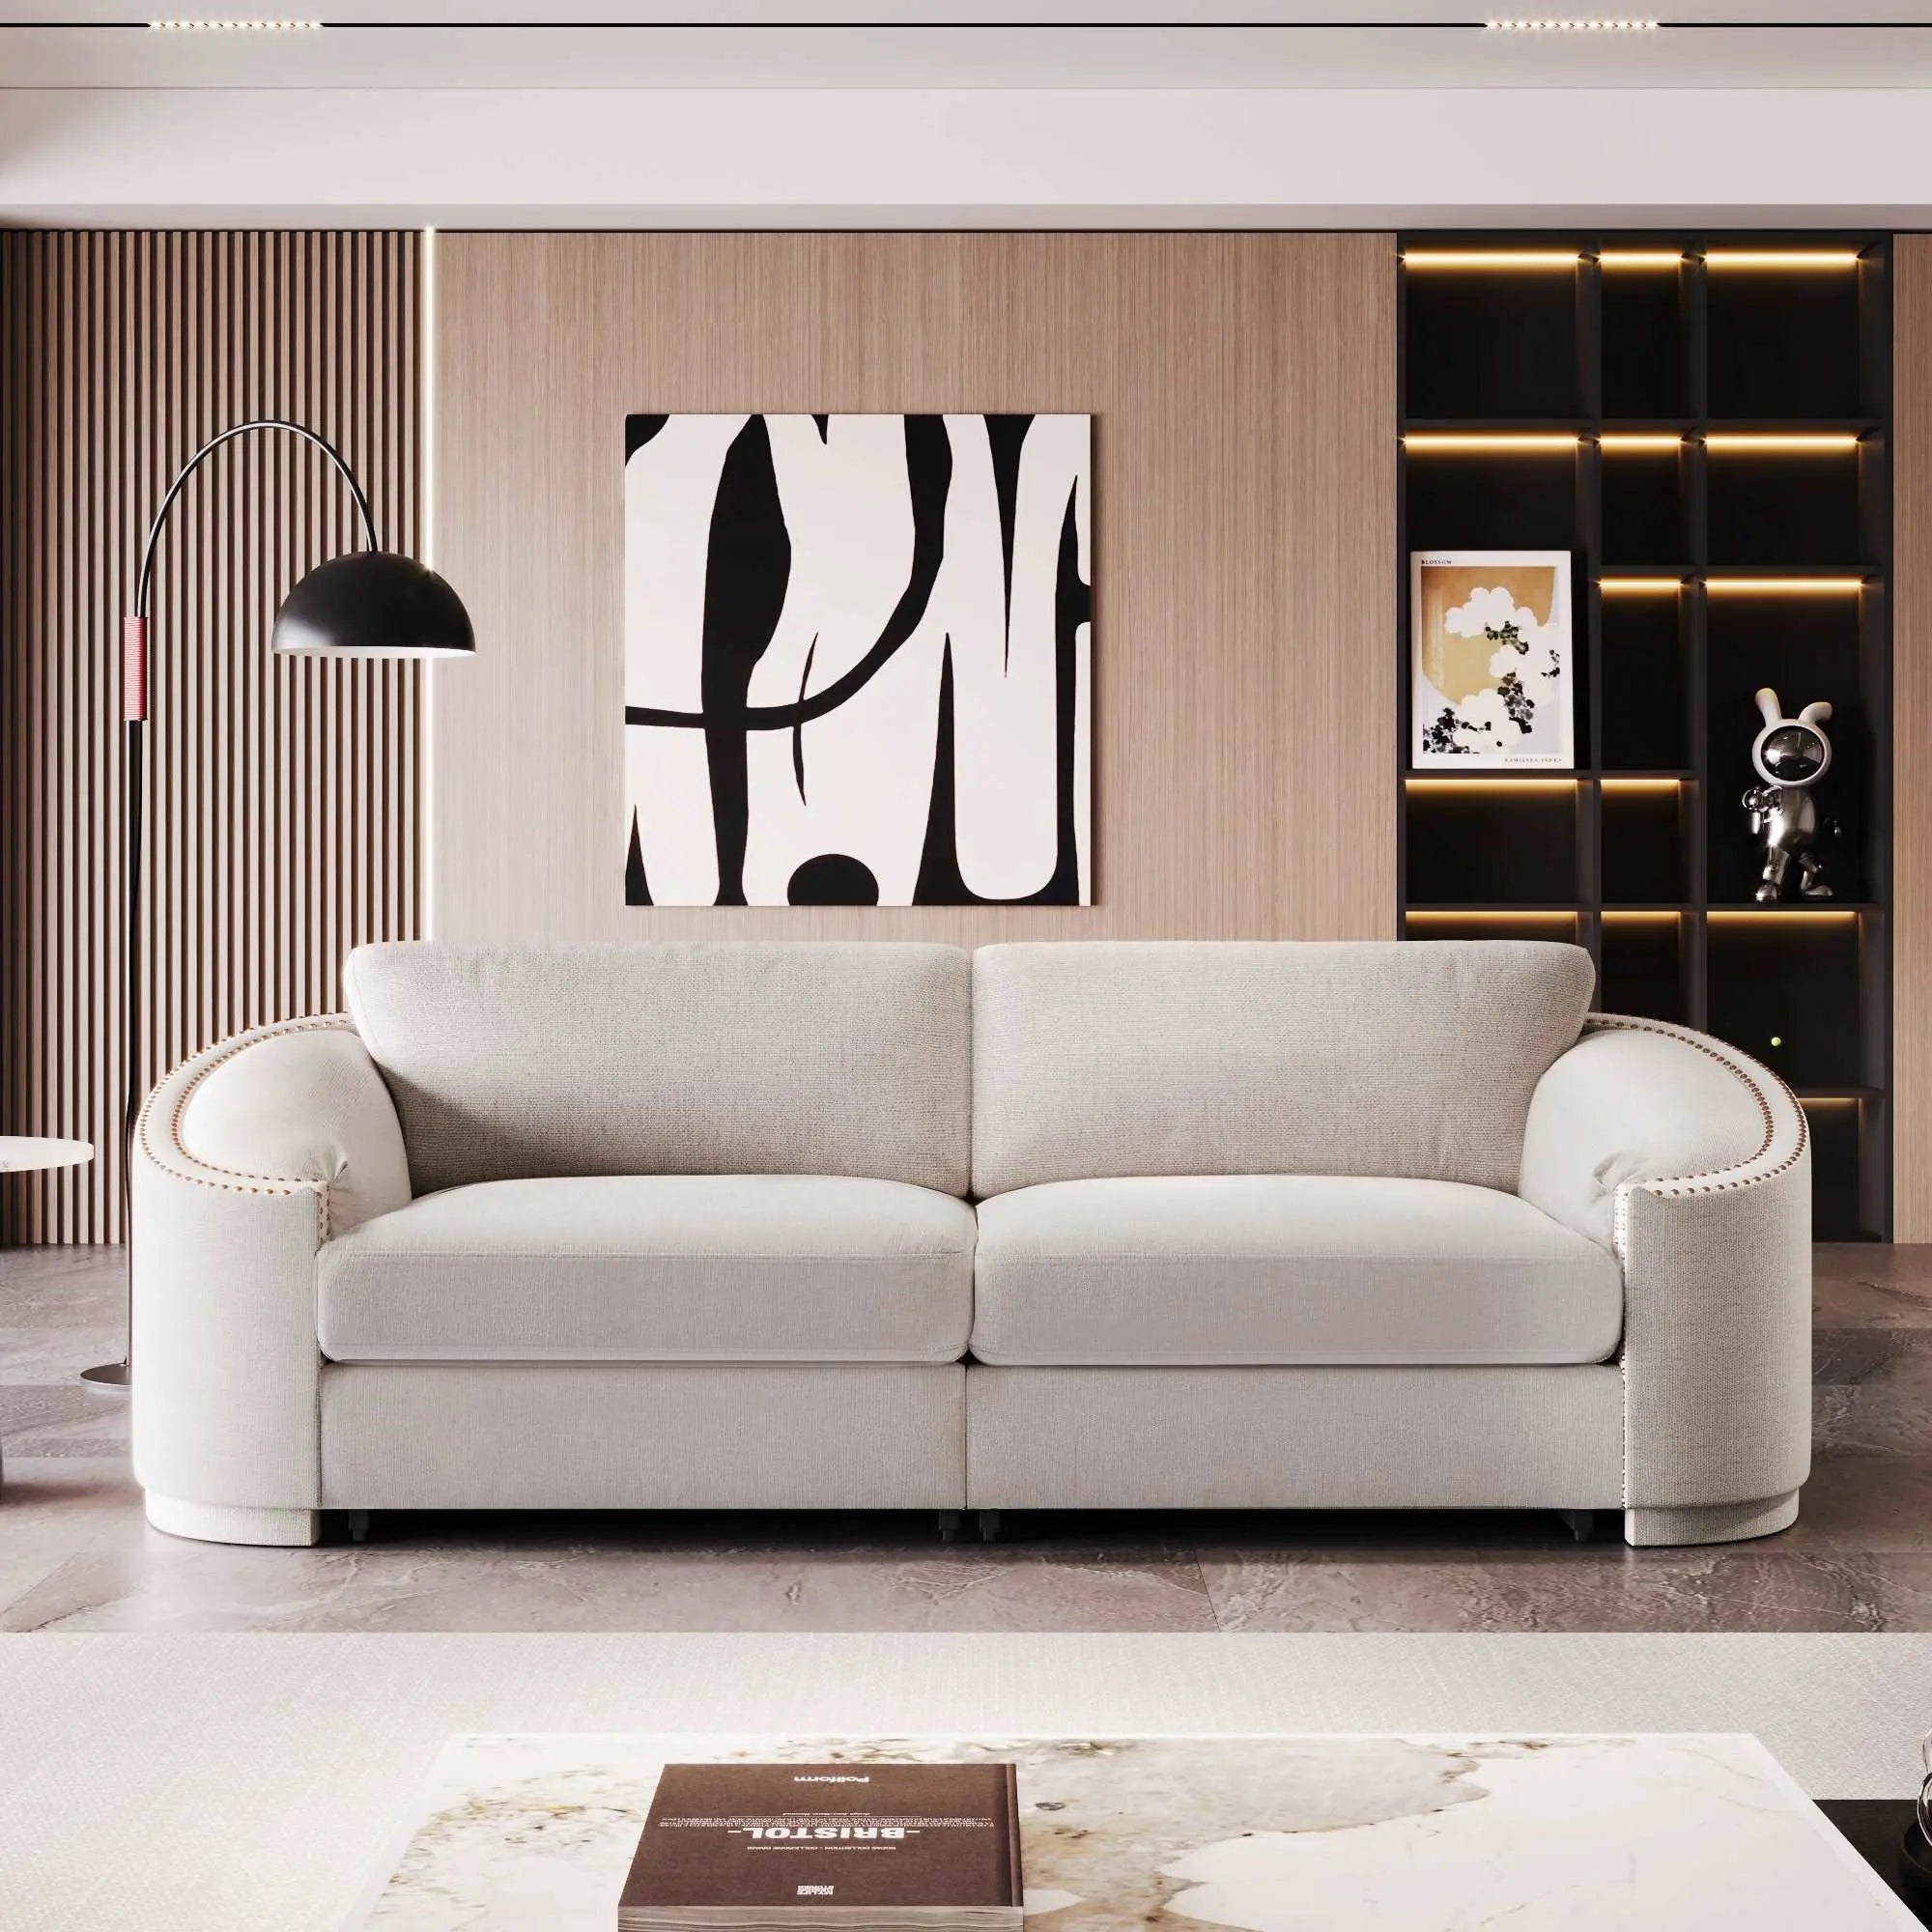 Bellemave 92" Stylish Sofa with Semilunar Arm, Rivet Detailing and Solid Frame